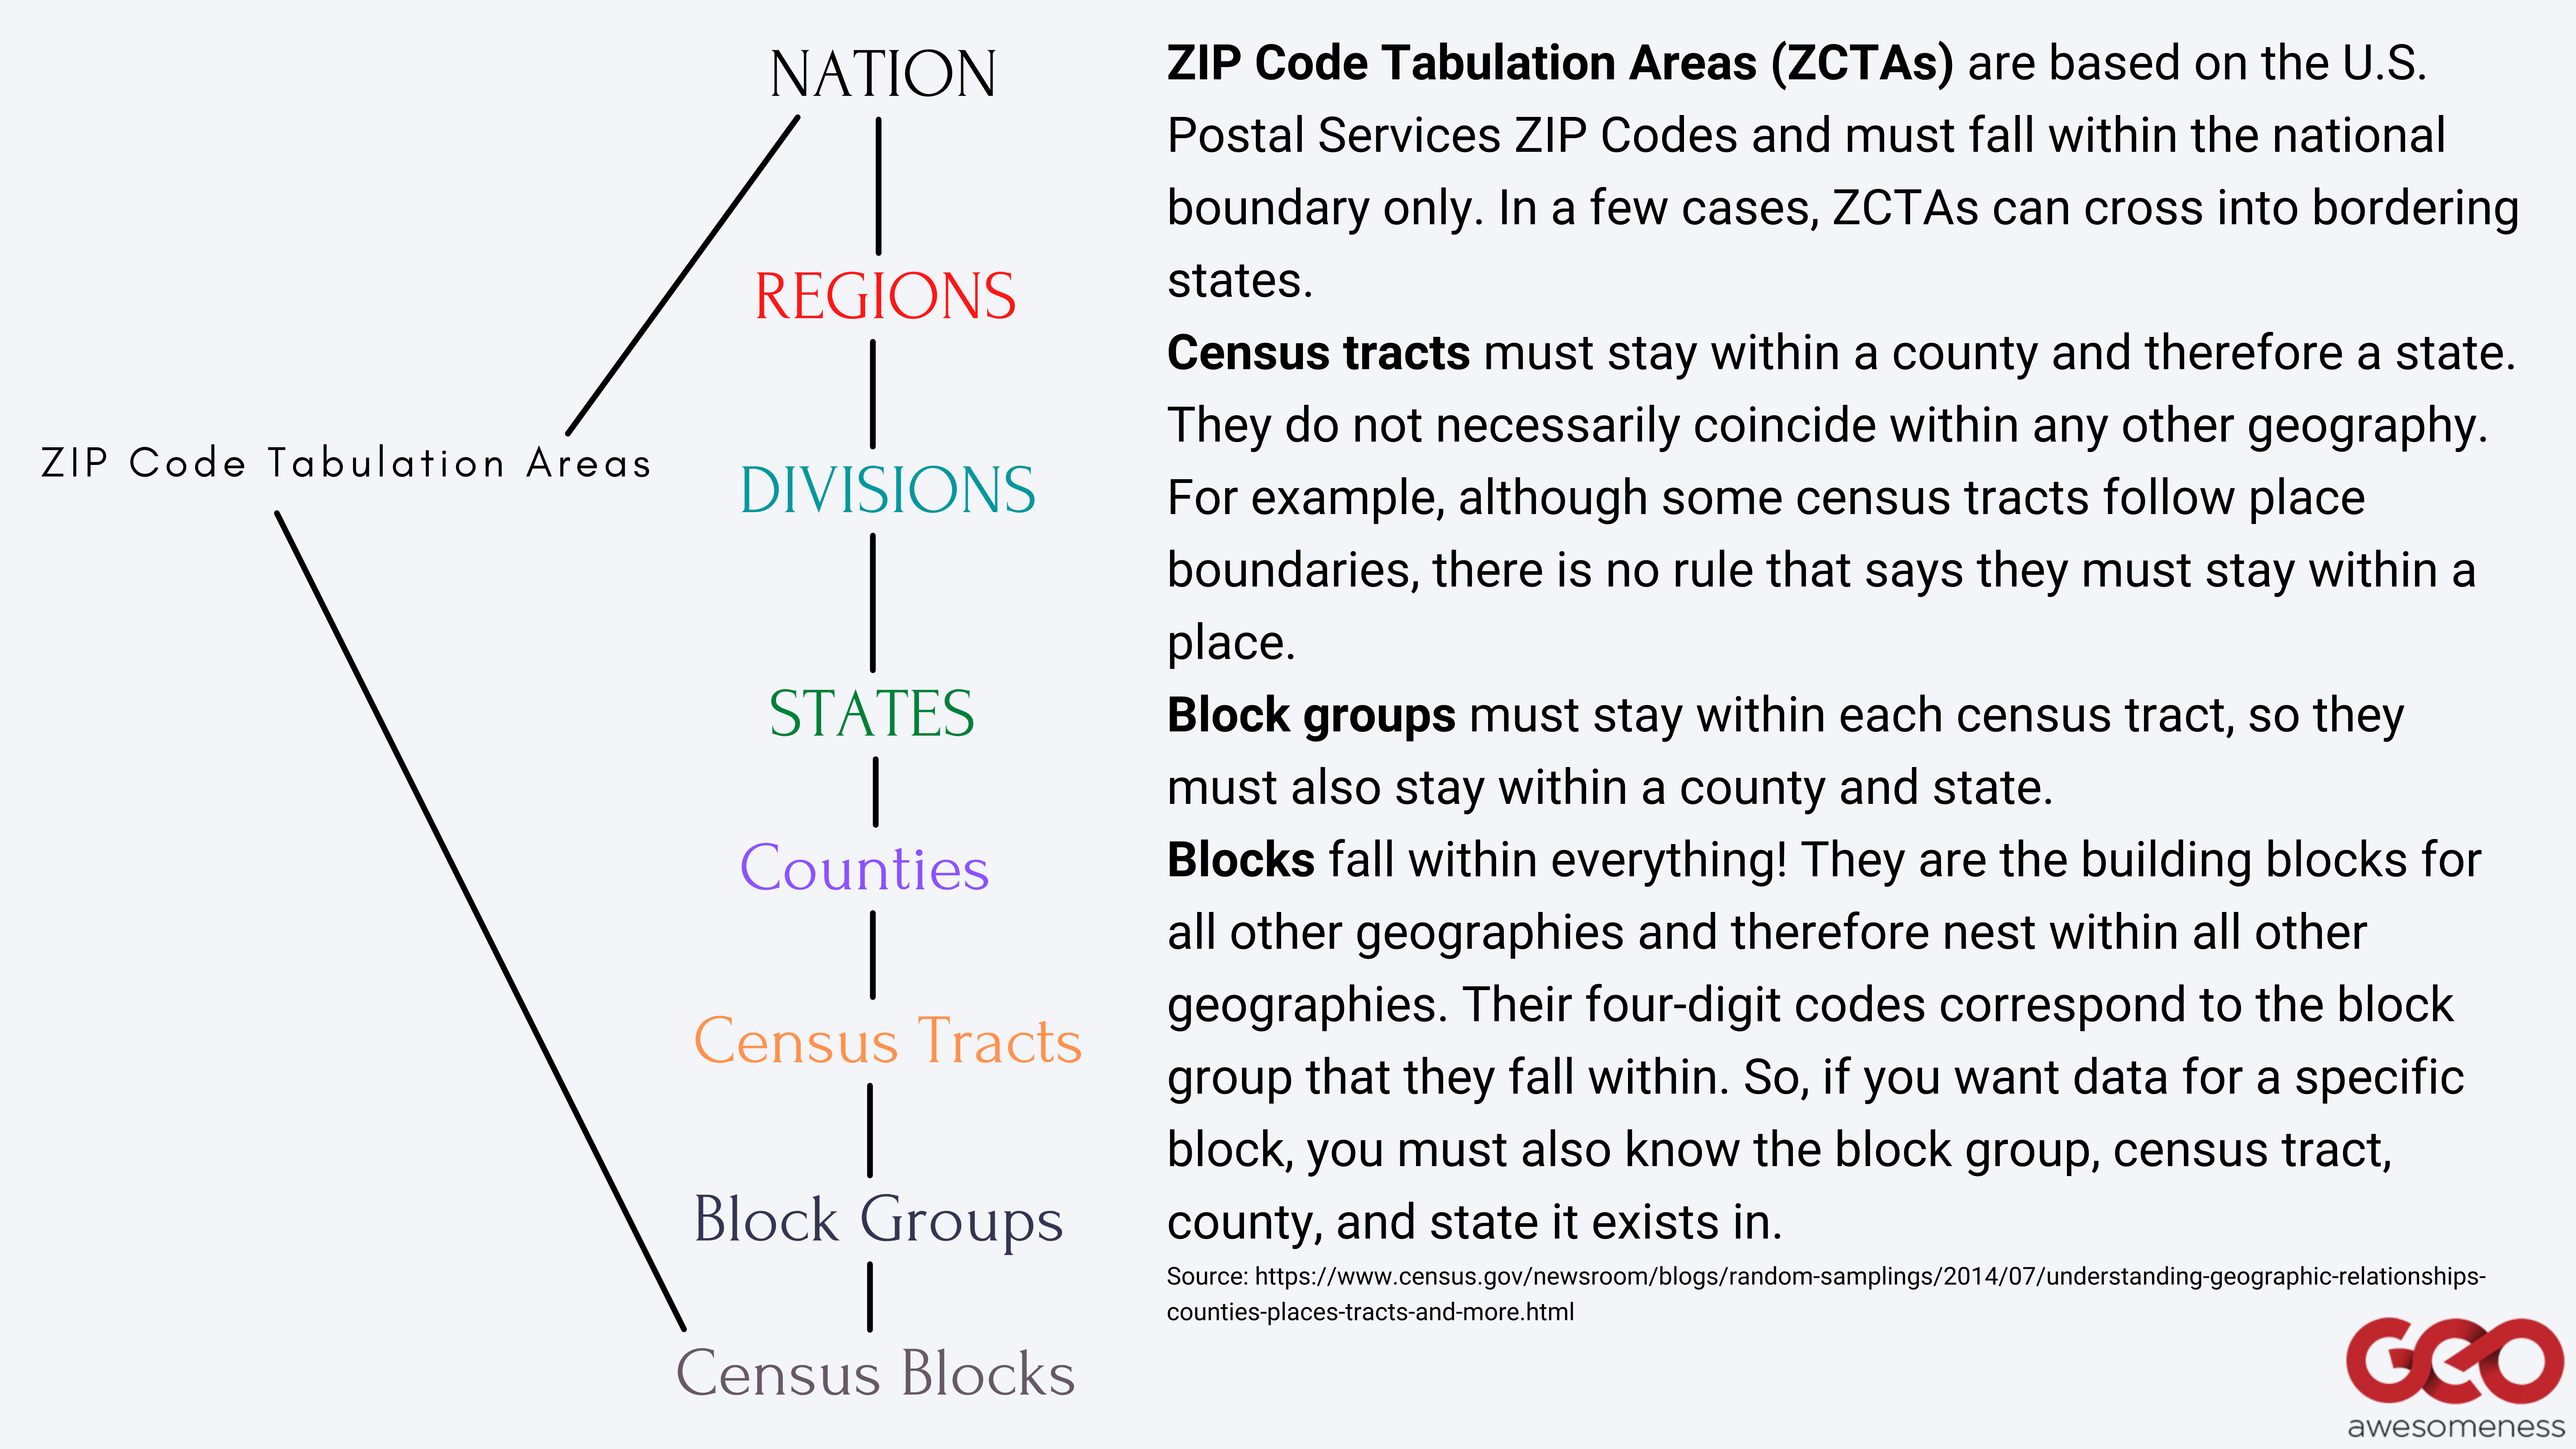 Hierarchy of census geographic entities in the U.S.